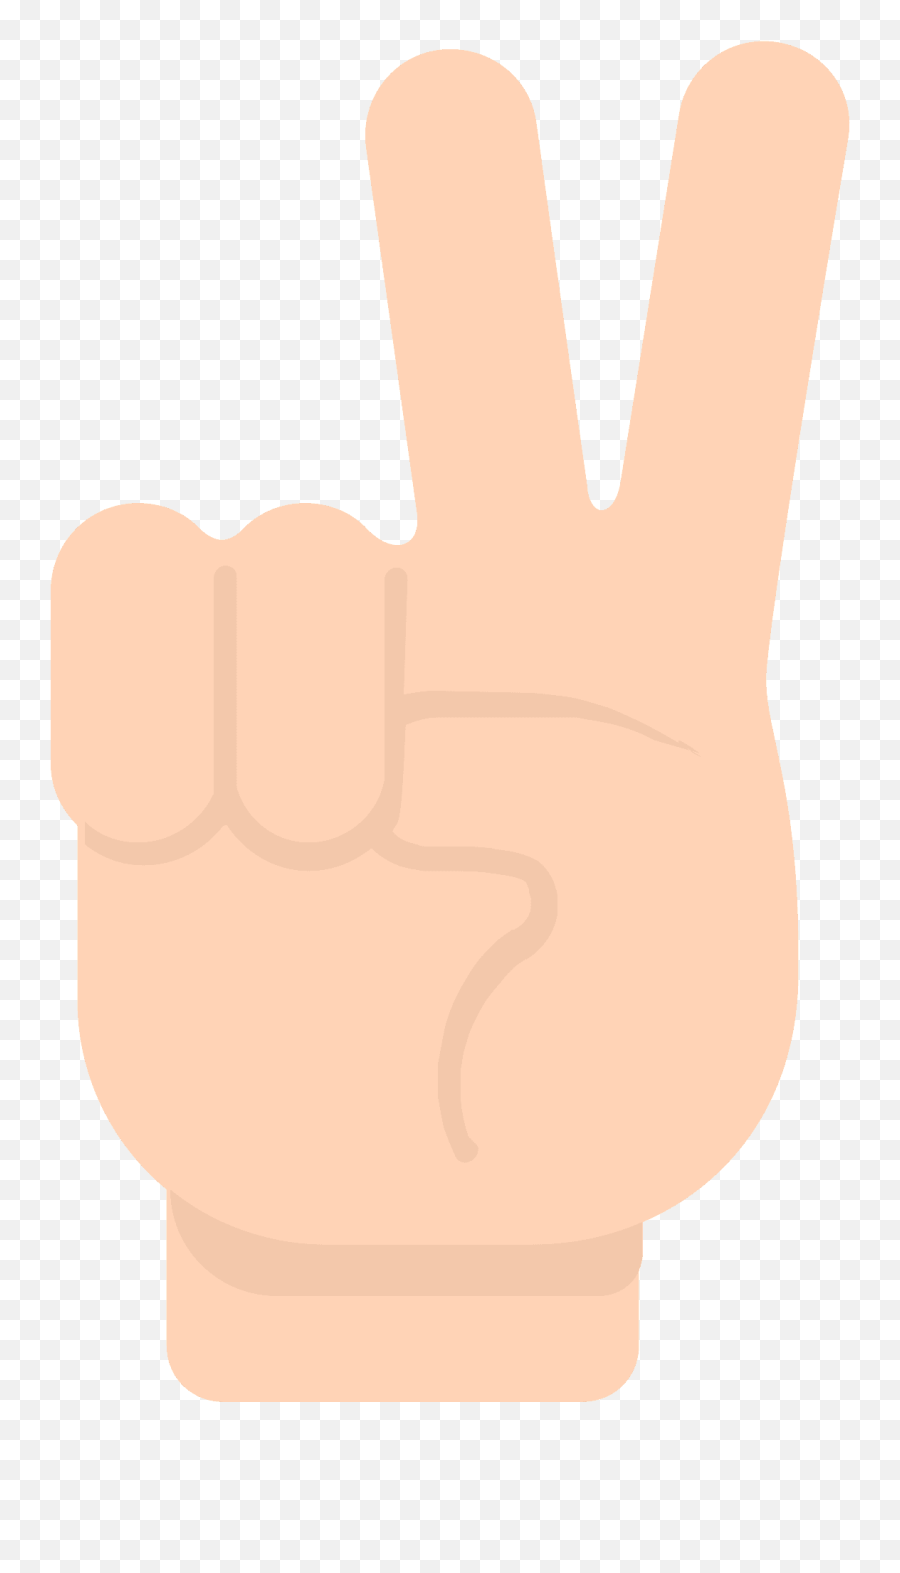 Victory Hand Emoji Clipart - Sign Language,Vulcan Salute Emoji For Android